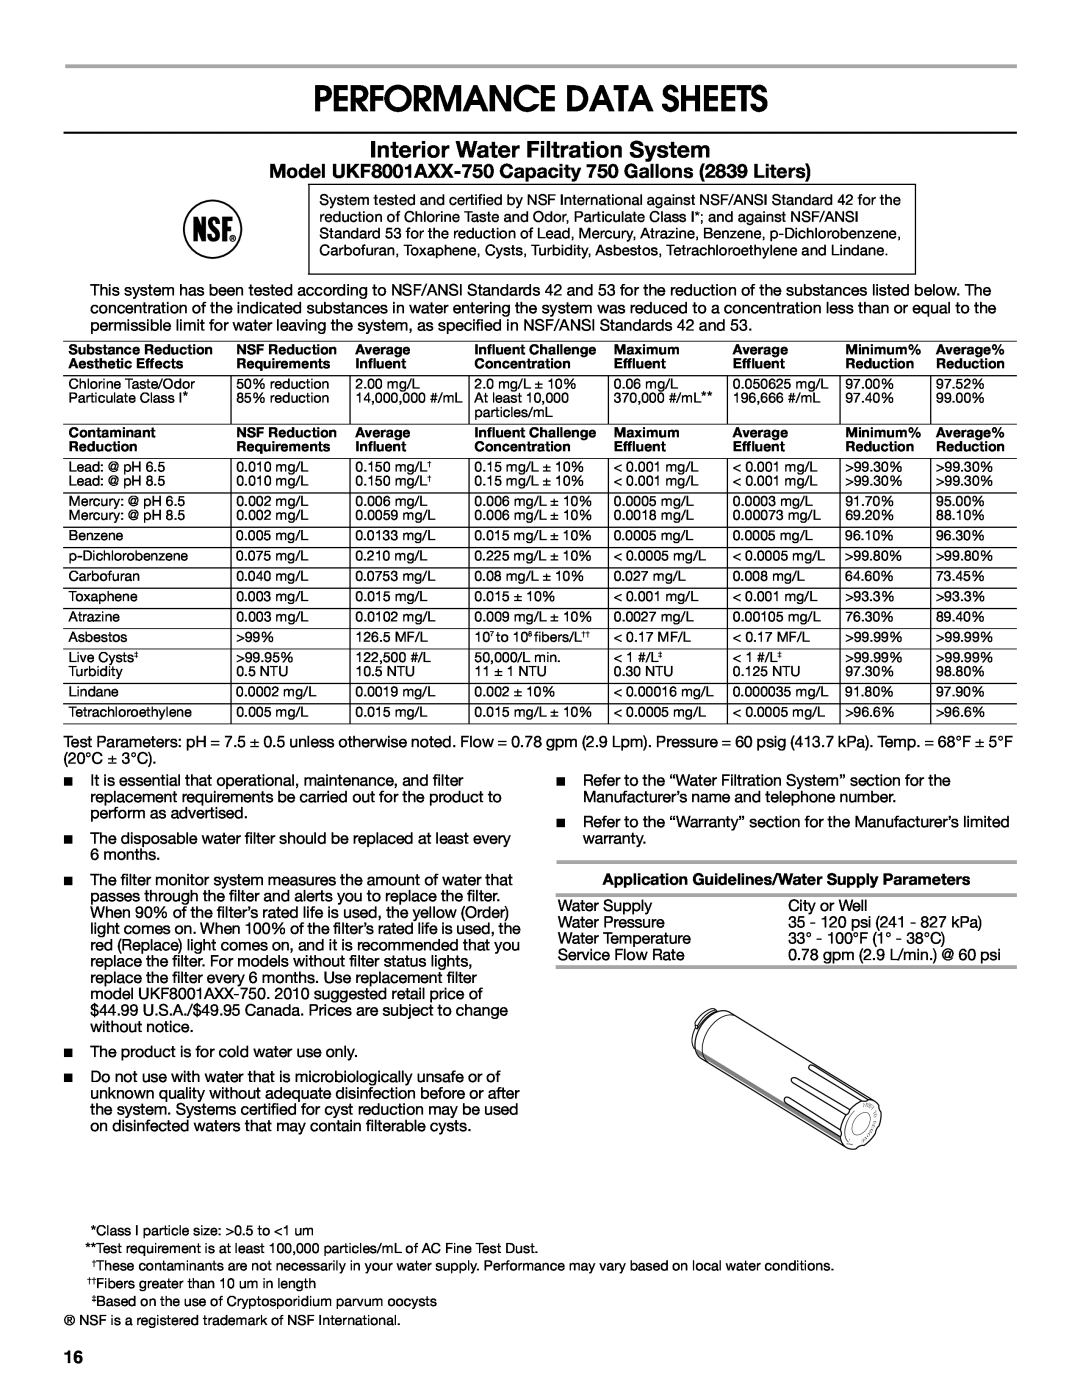 Jenn-Air W10329370A installation instructions Performance Data Sheets, Interior Water Filtration System 